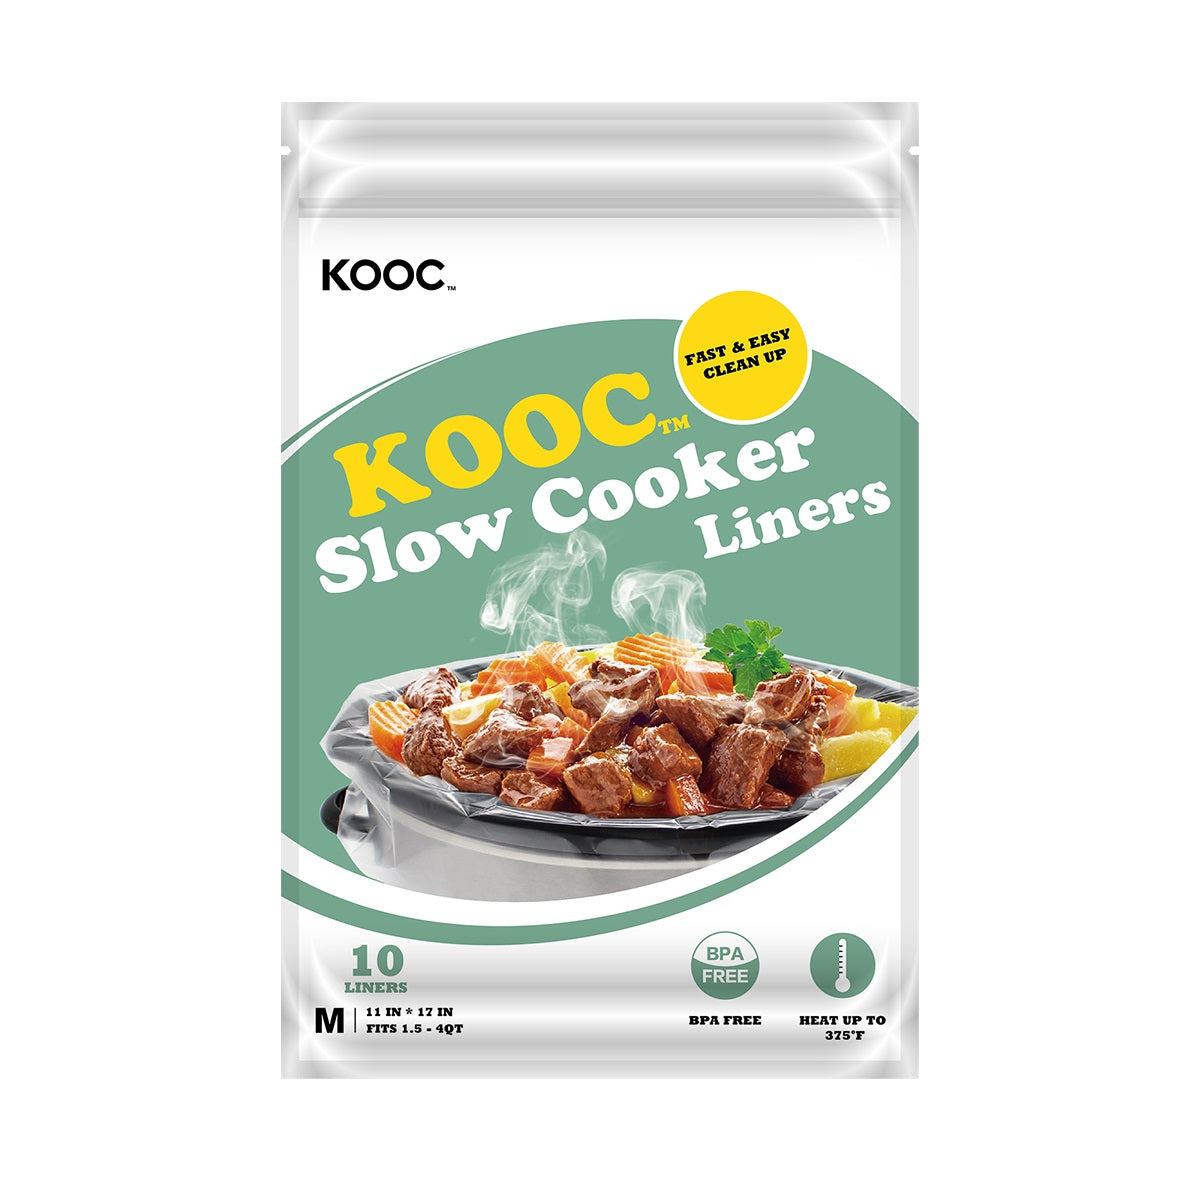 KOOC - Premium Disposable Slow Cooker Liners, XL Size Fit 6 to 10